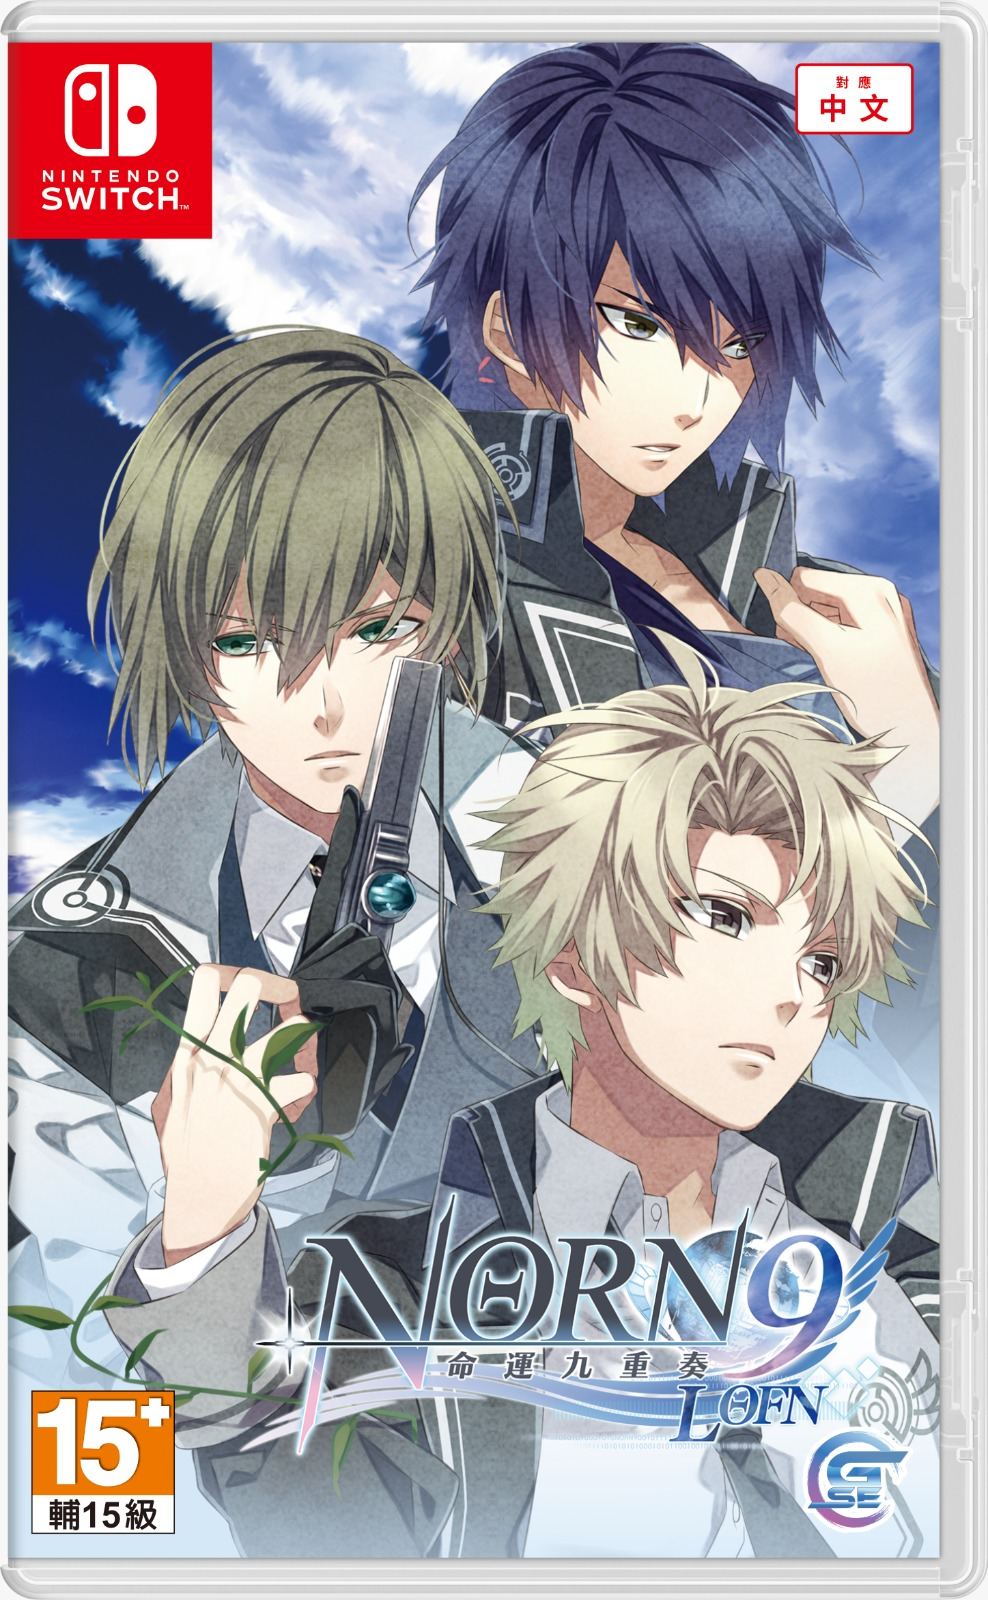 NORN9 LOFN for Nintendo Switch (Chinese) for Nintendo Switch